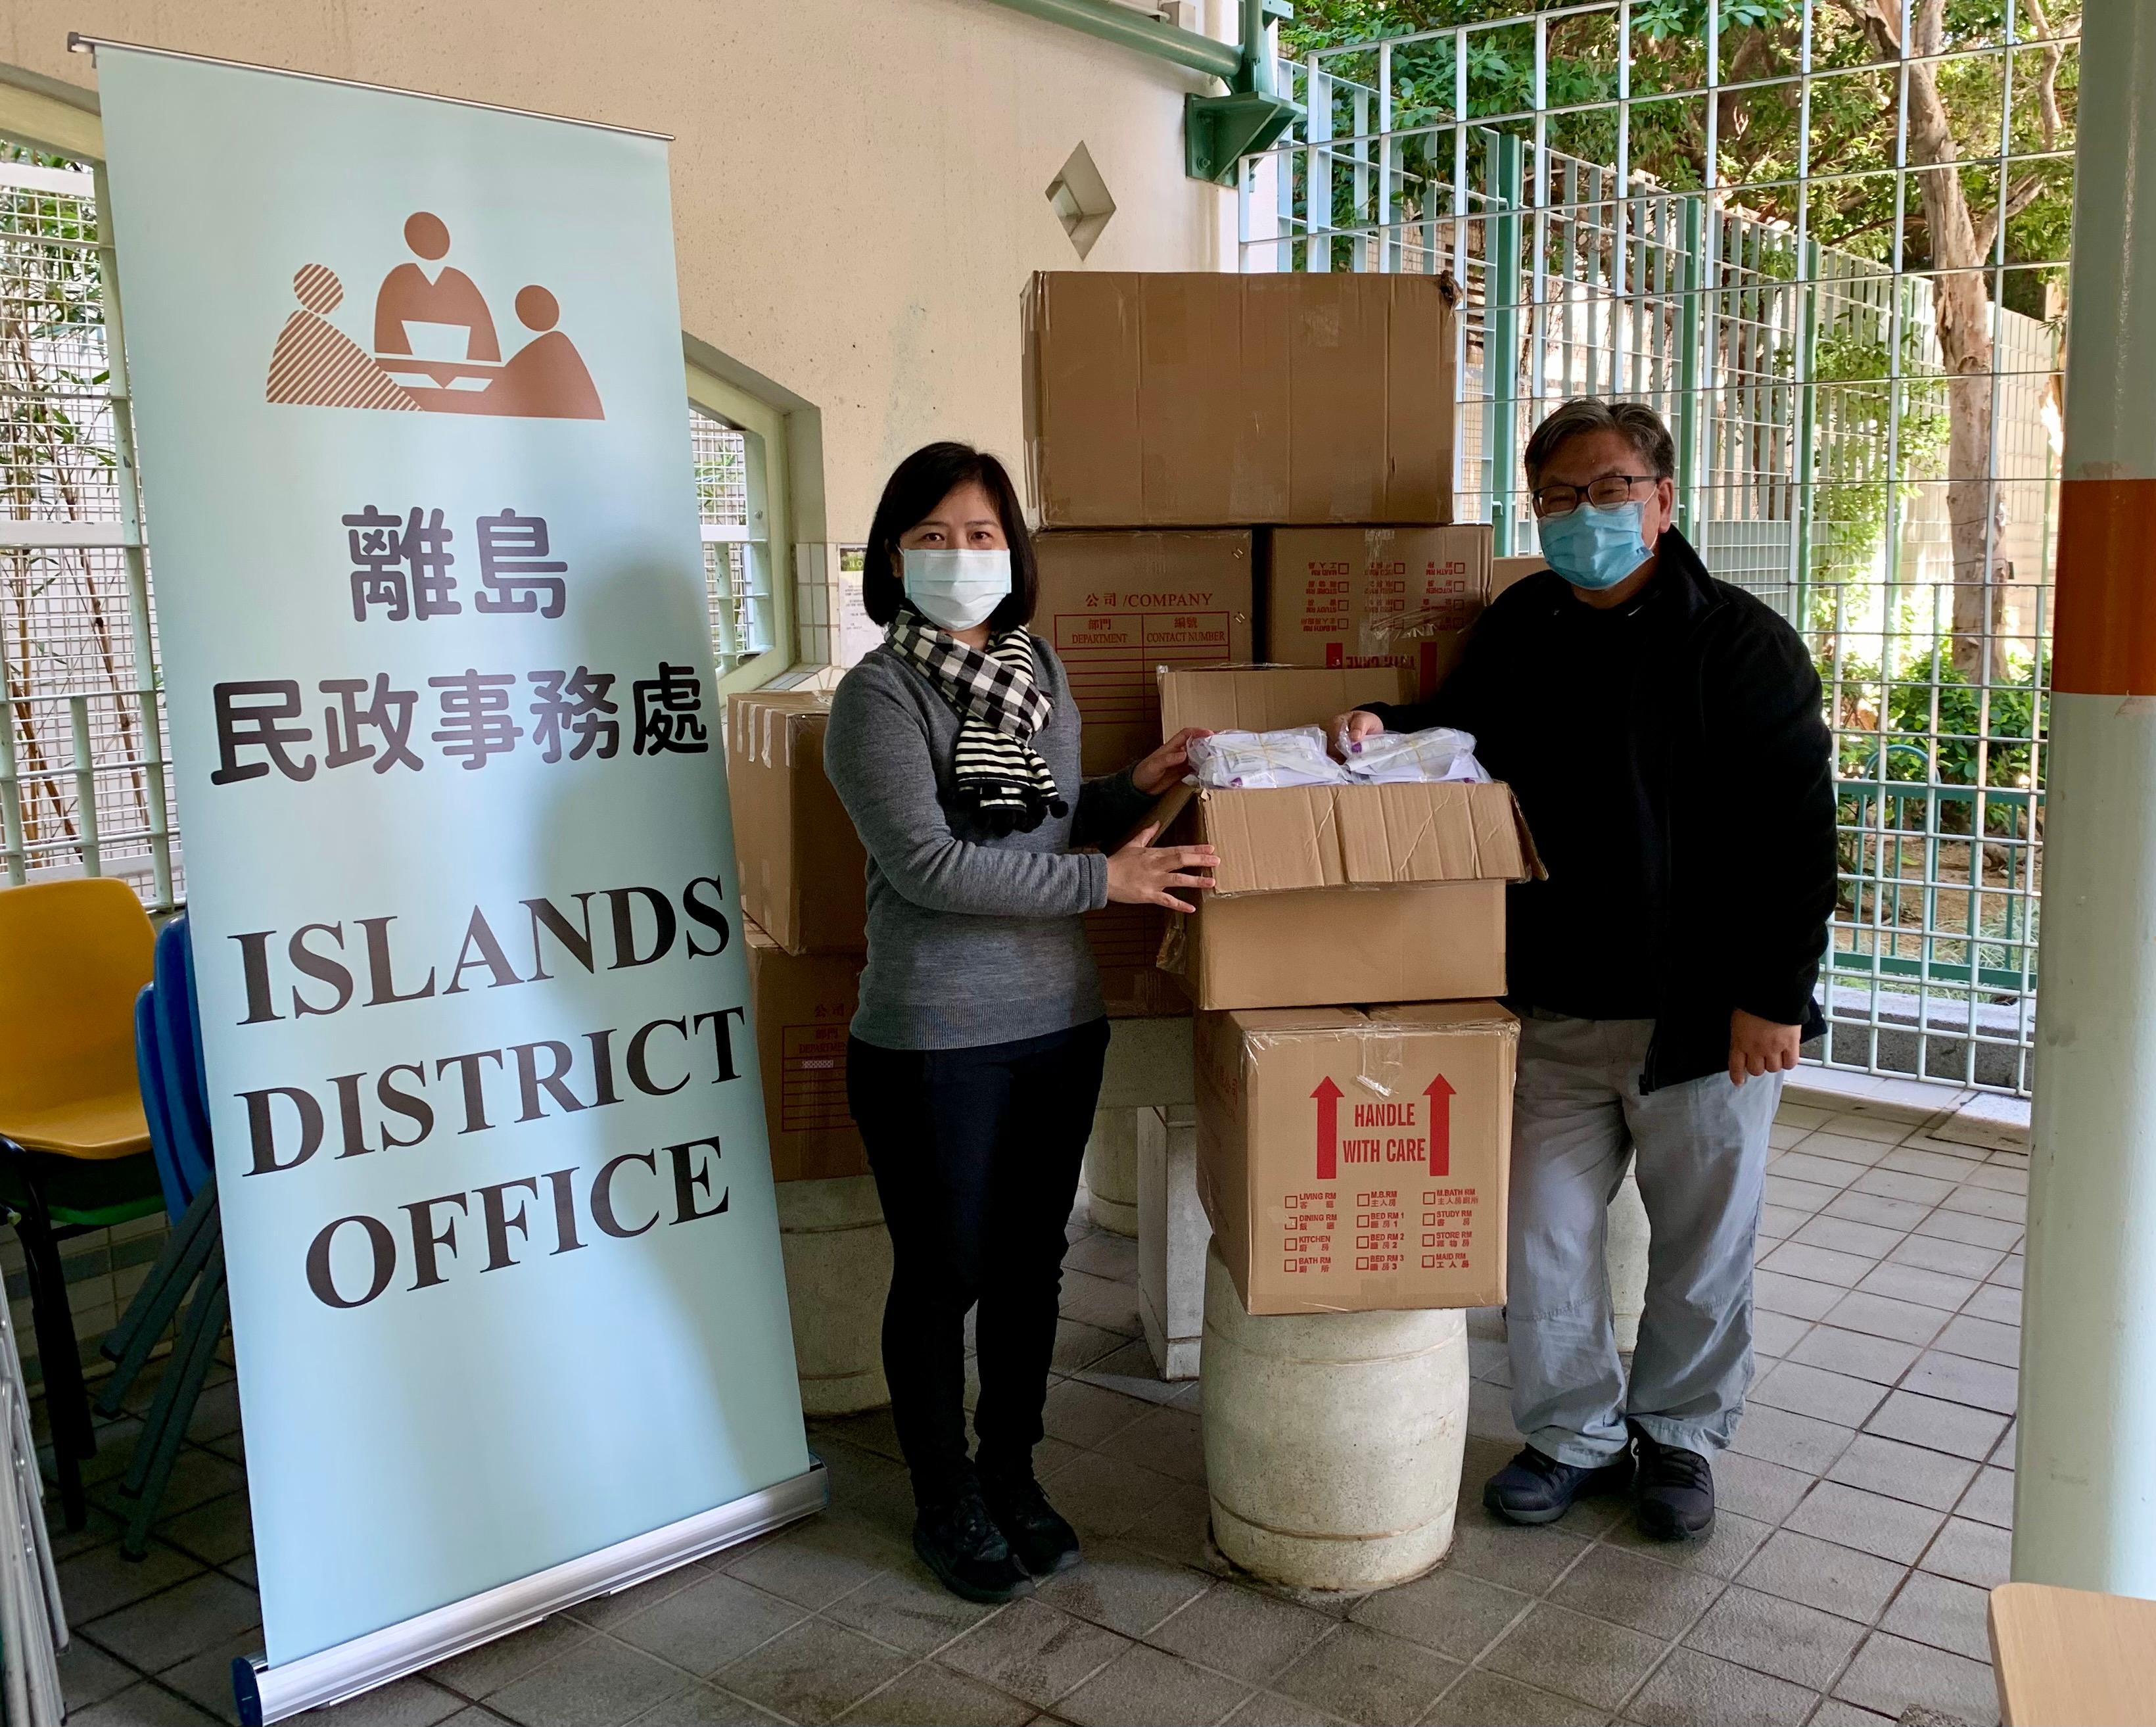 The Islands District Office today (February 14) distributed rapid test kits to households, cleansing workers and property management staff living and working in Ching Yat House, Hong Yat House and Yung Yat House of Yat Tung (I) Estate for voluntary testing through the property services management office of Yat Tung Estate in Tung Chung.
